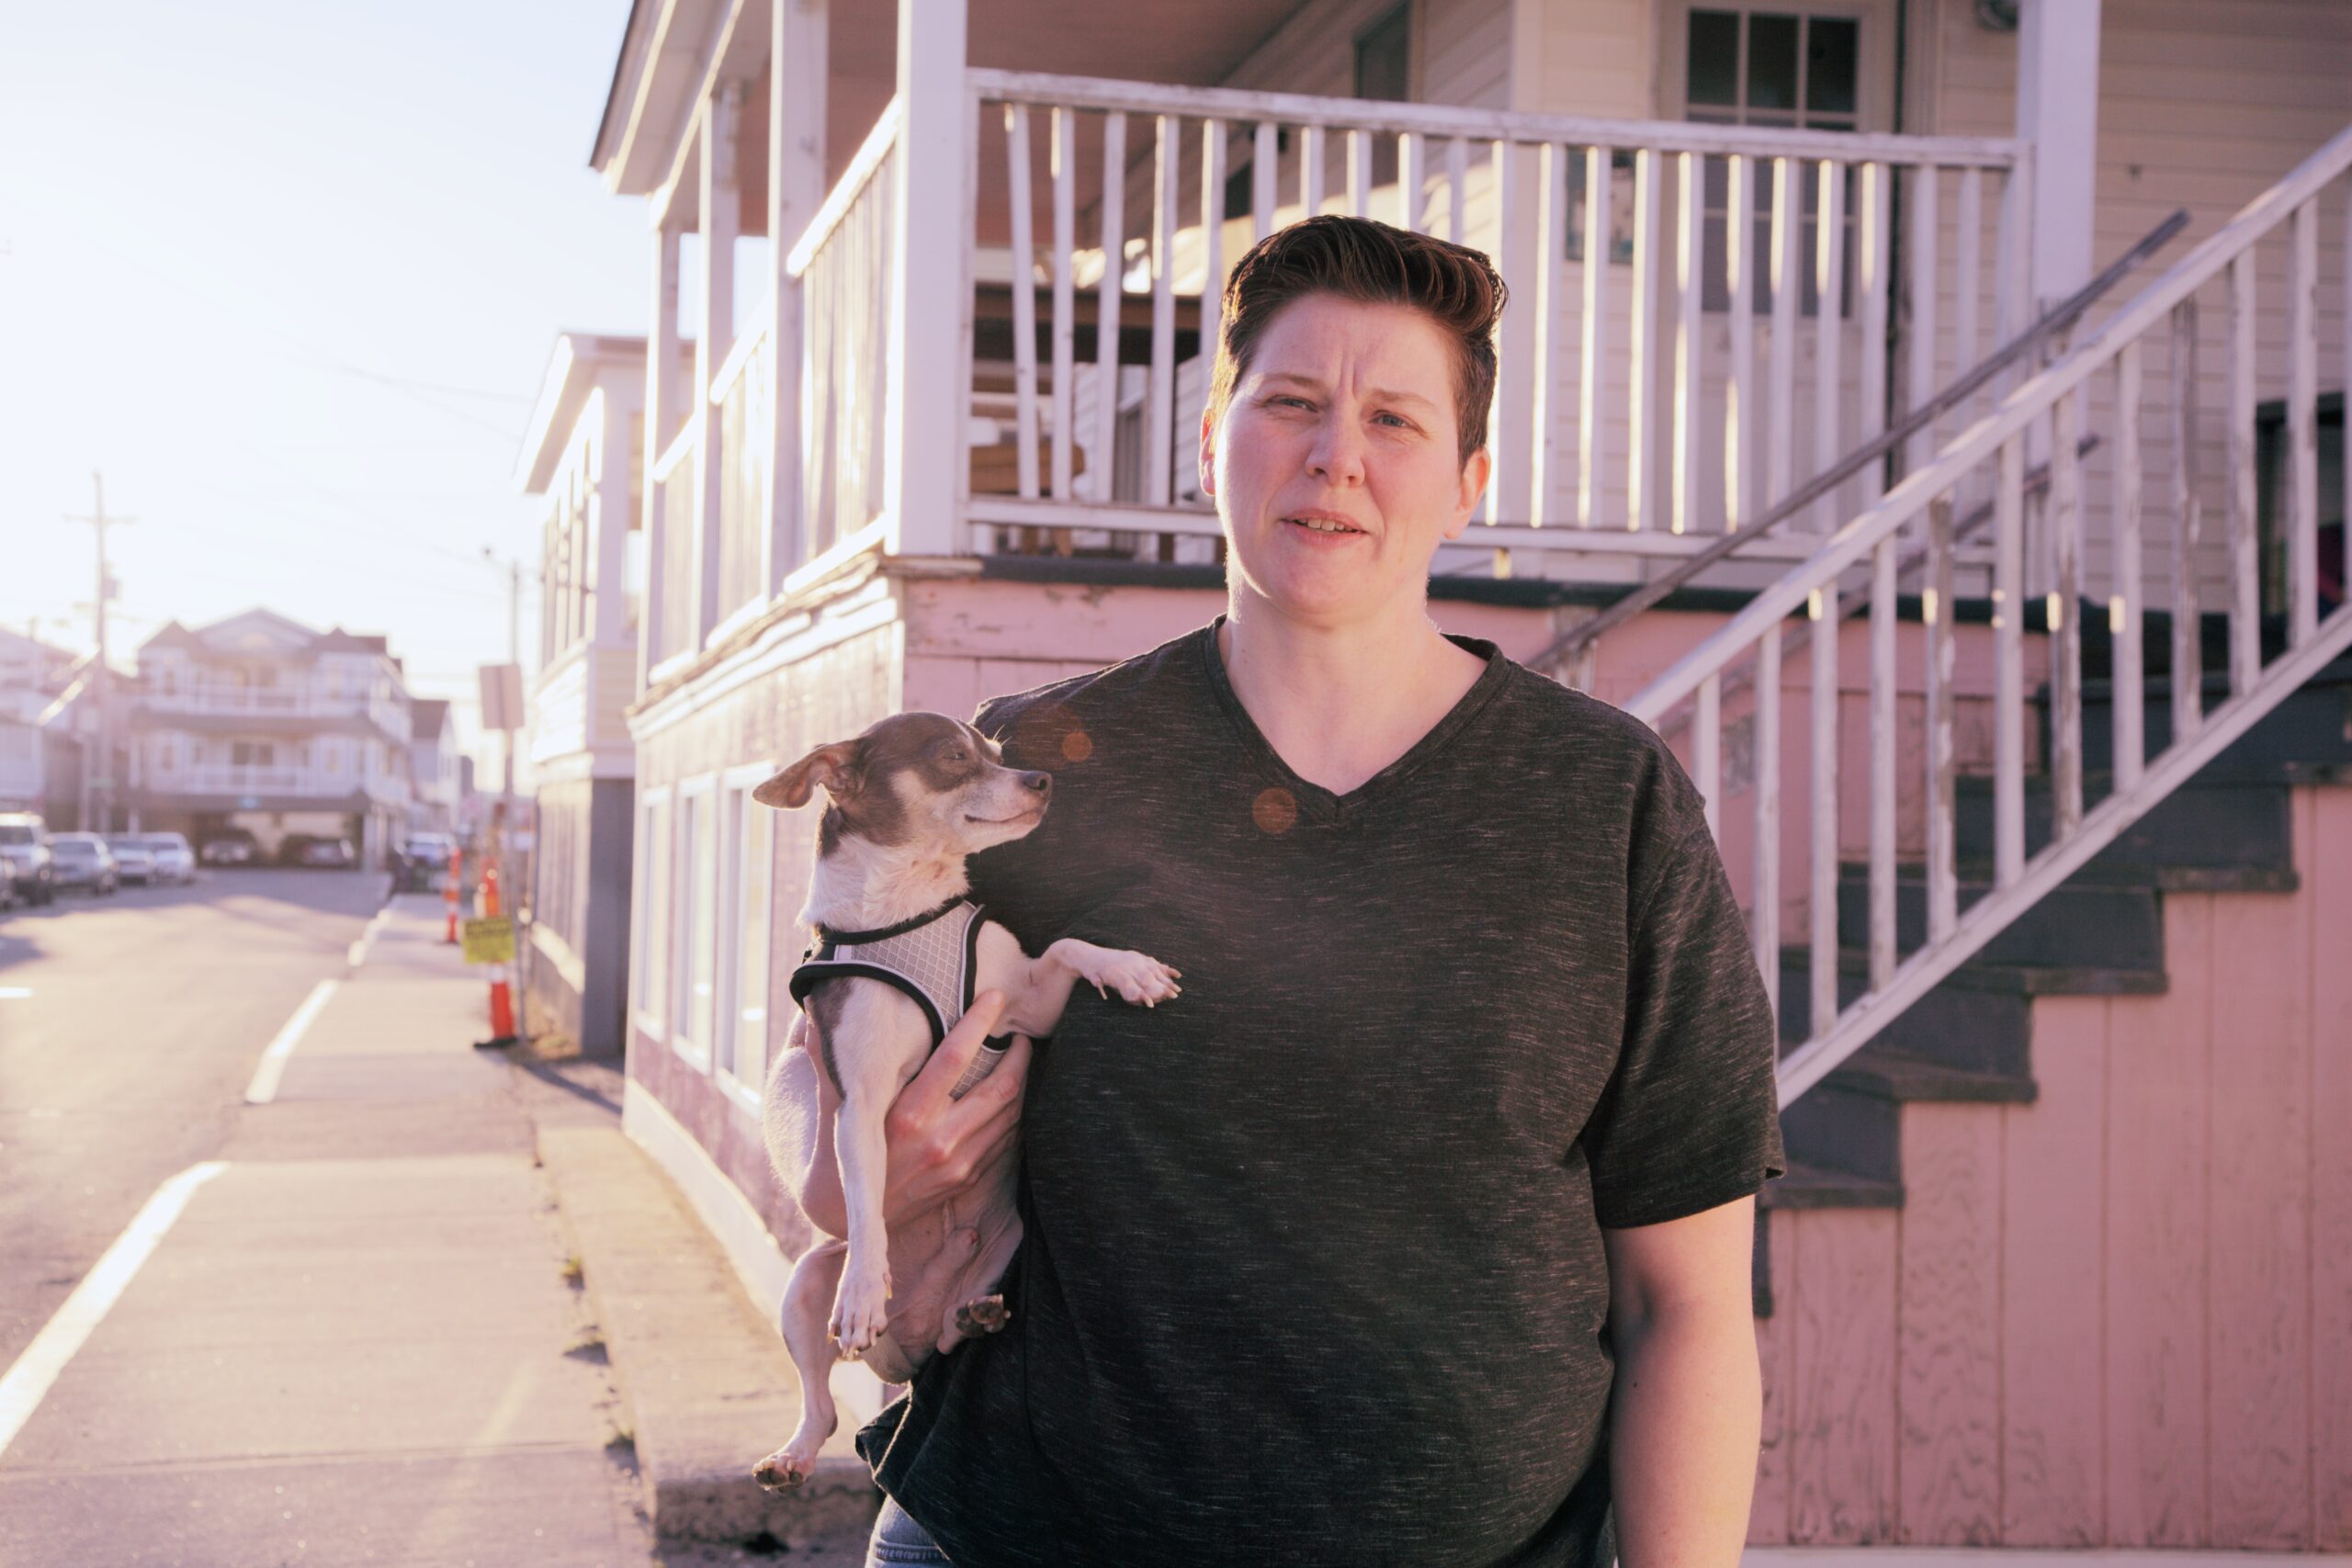 Image of a person holding a dog